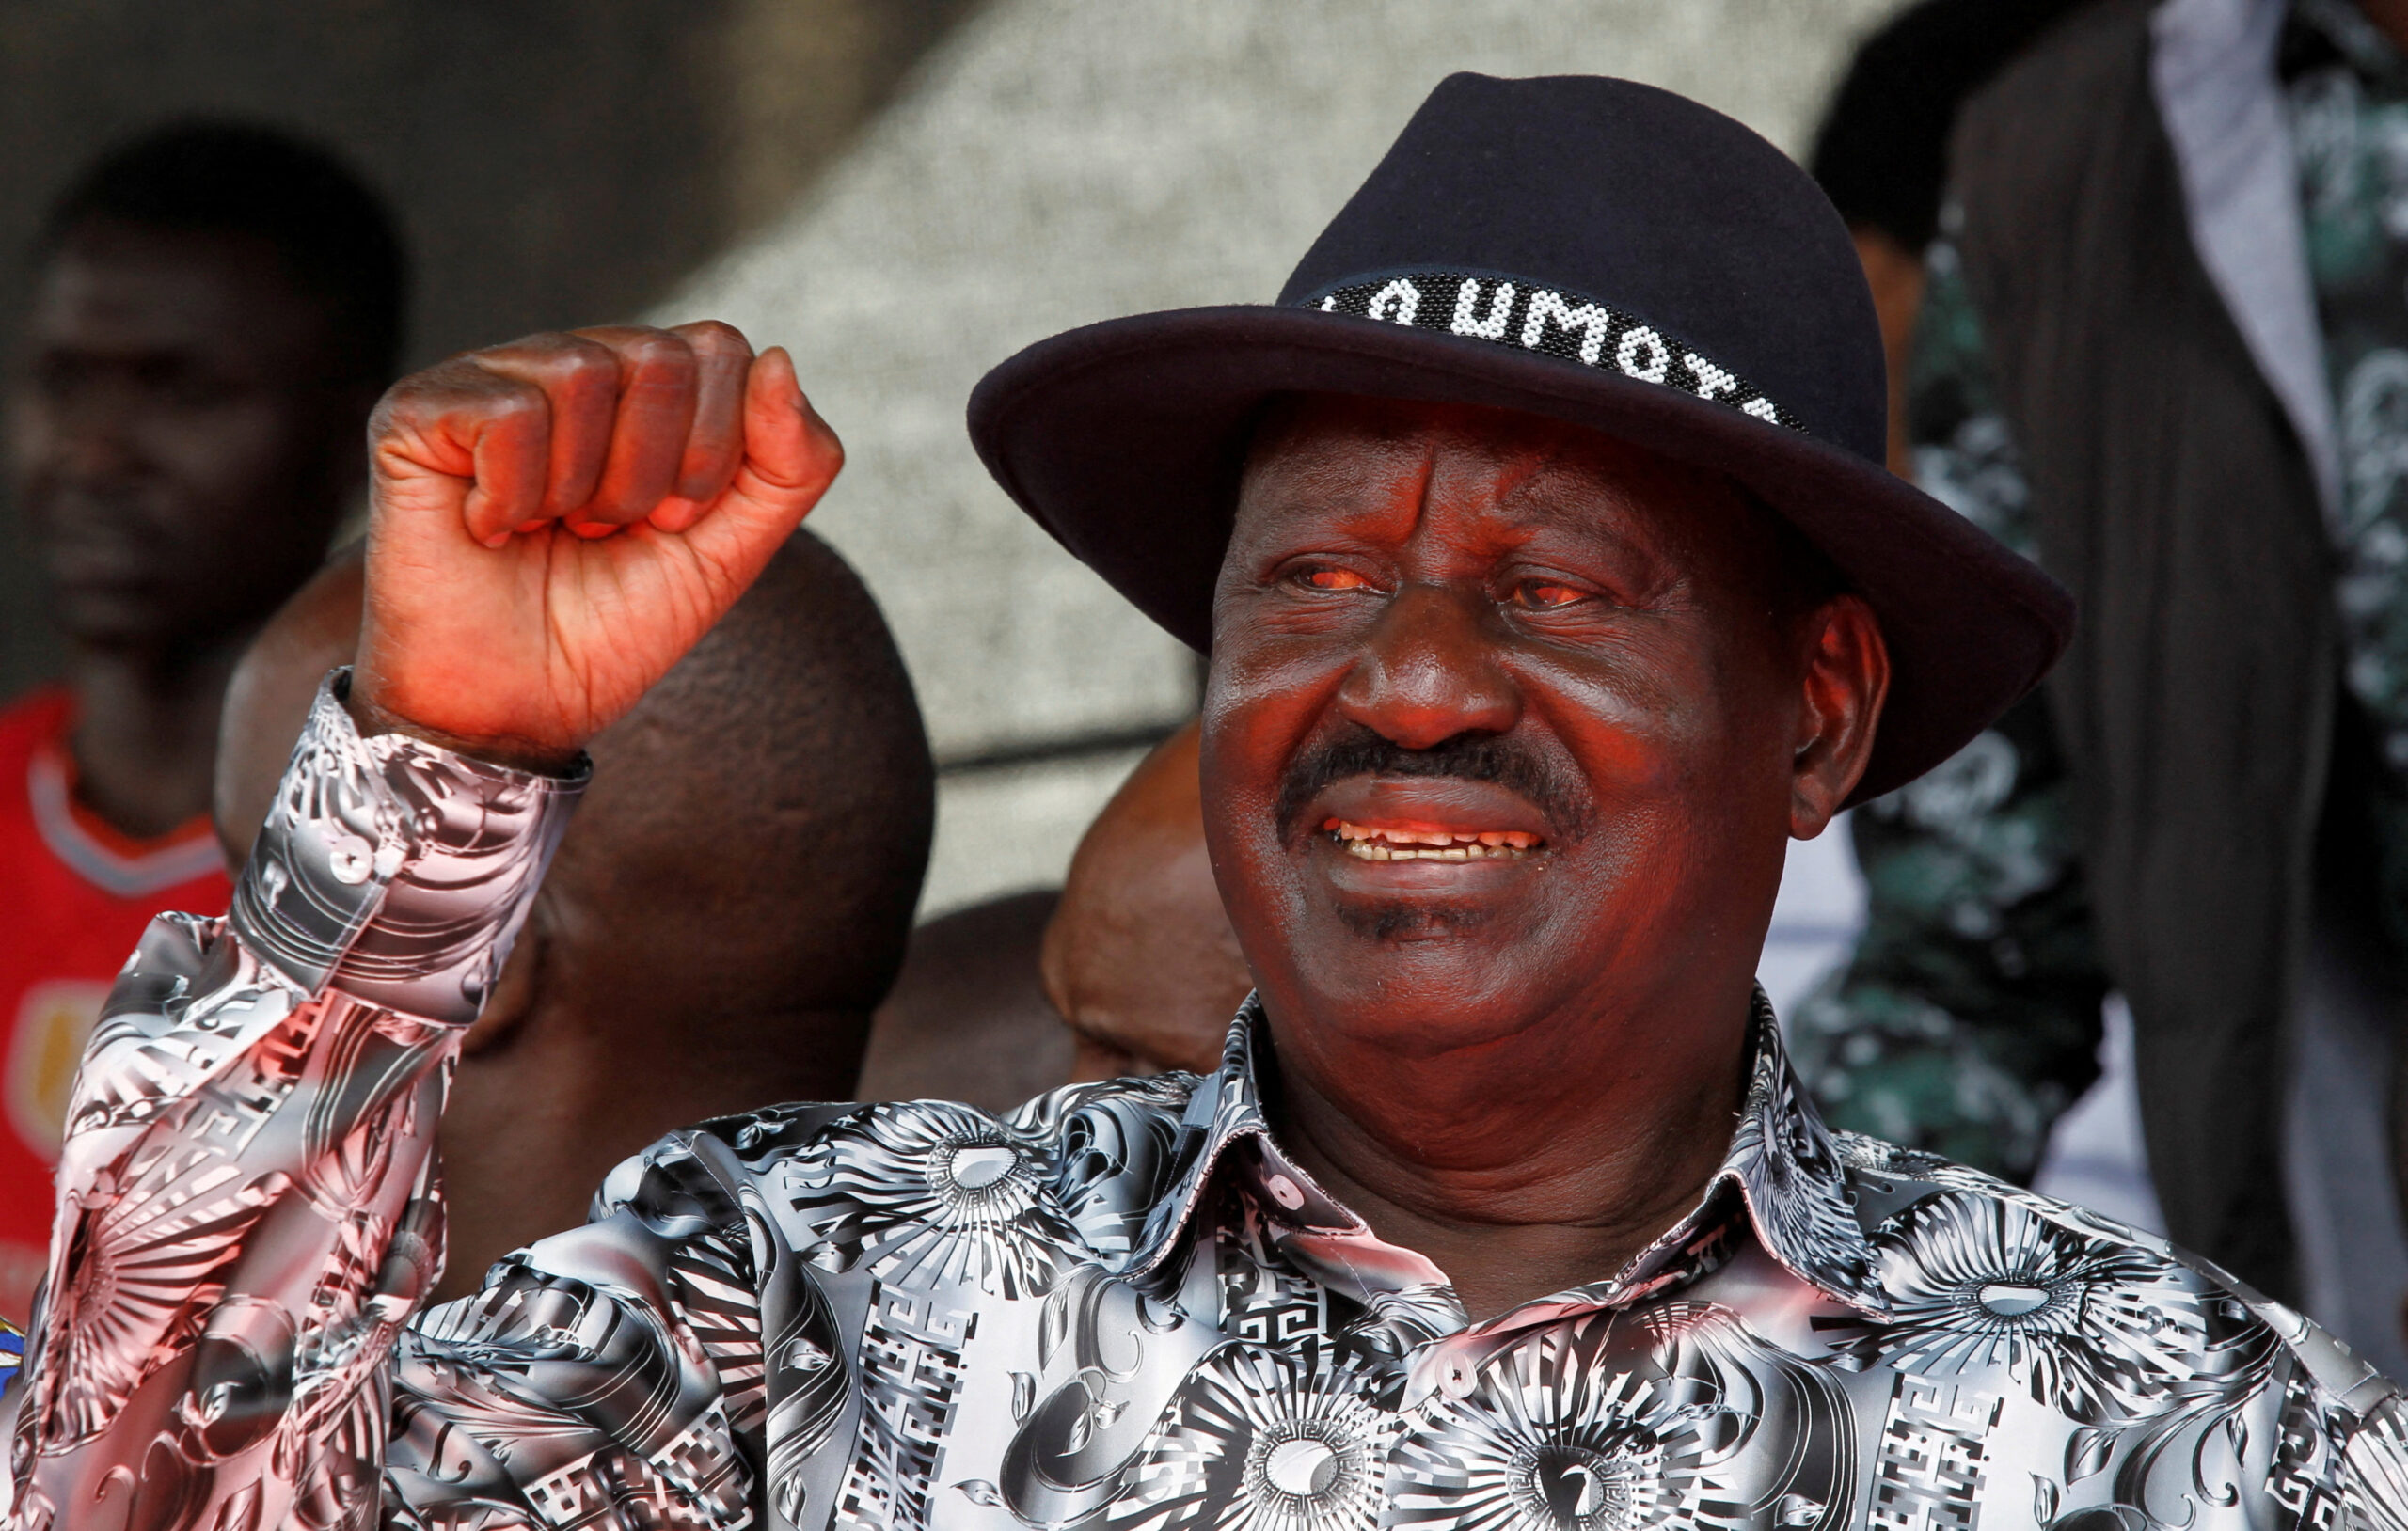 Kenya's opposition leader Raila Odinga, of the Azimio La Umoja (Declaration of Unity) One Kenya Alliance, attends a rally ahead of talks with President William Ruto's government on high cost of living and electoral reforms at the Kamukunji grounds of Nairobi, Kenya April 16, 2023. REUTERS/Monicah Mwangi